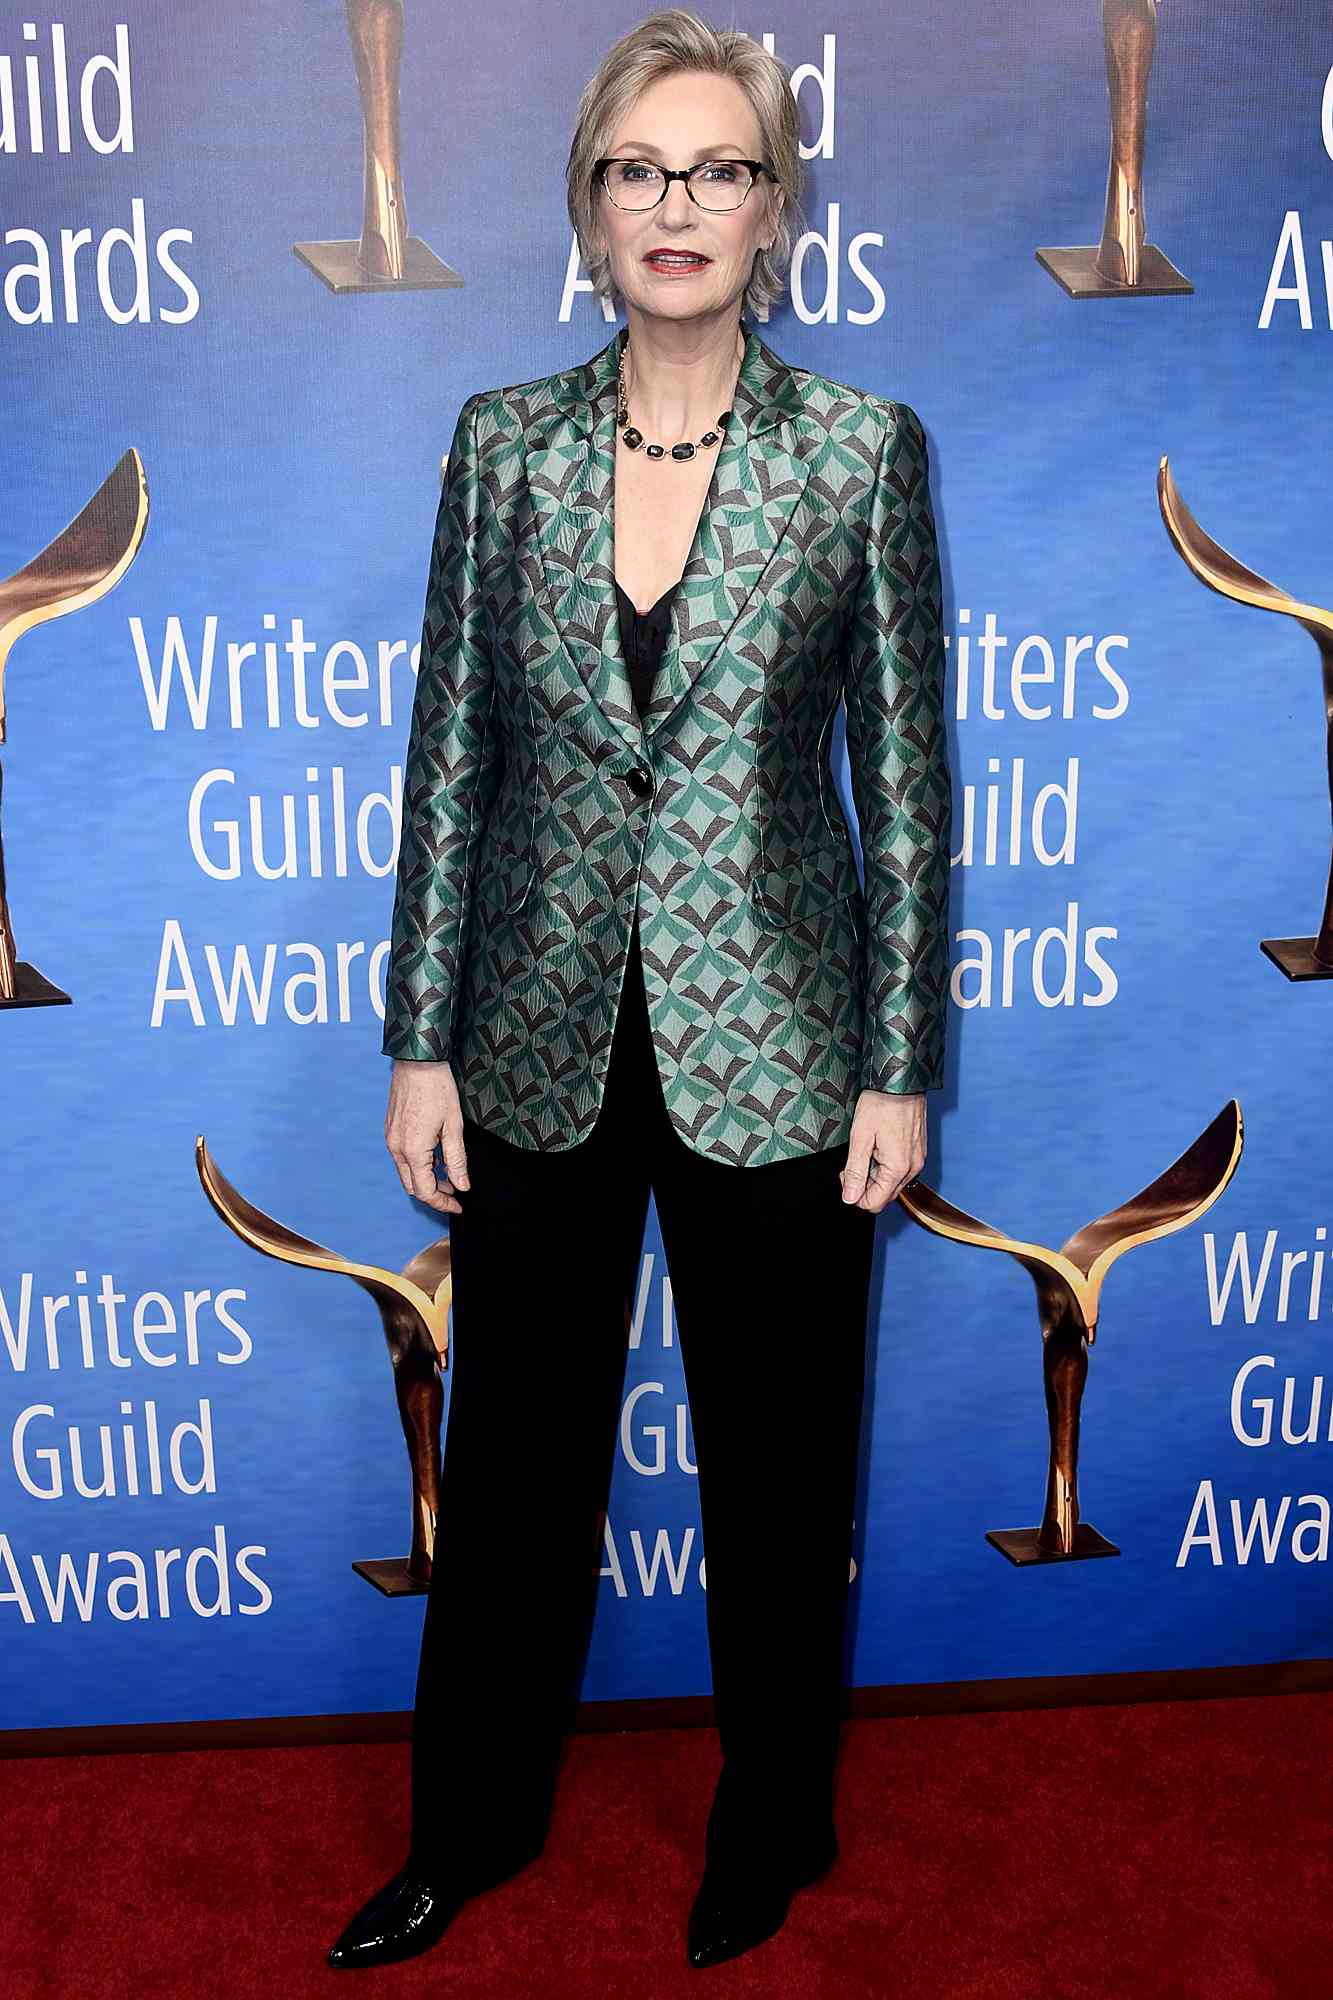 2019 Writers Guild Awards L.A. Ceremony - Arrivals